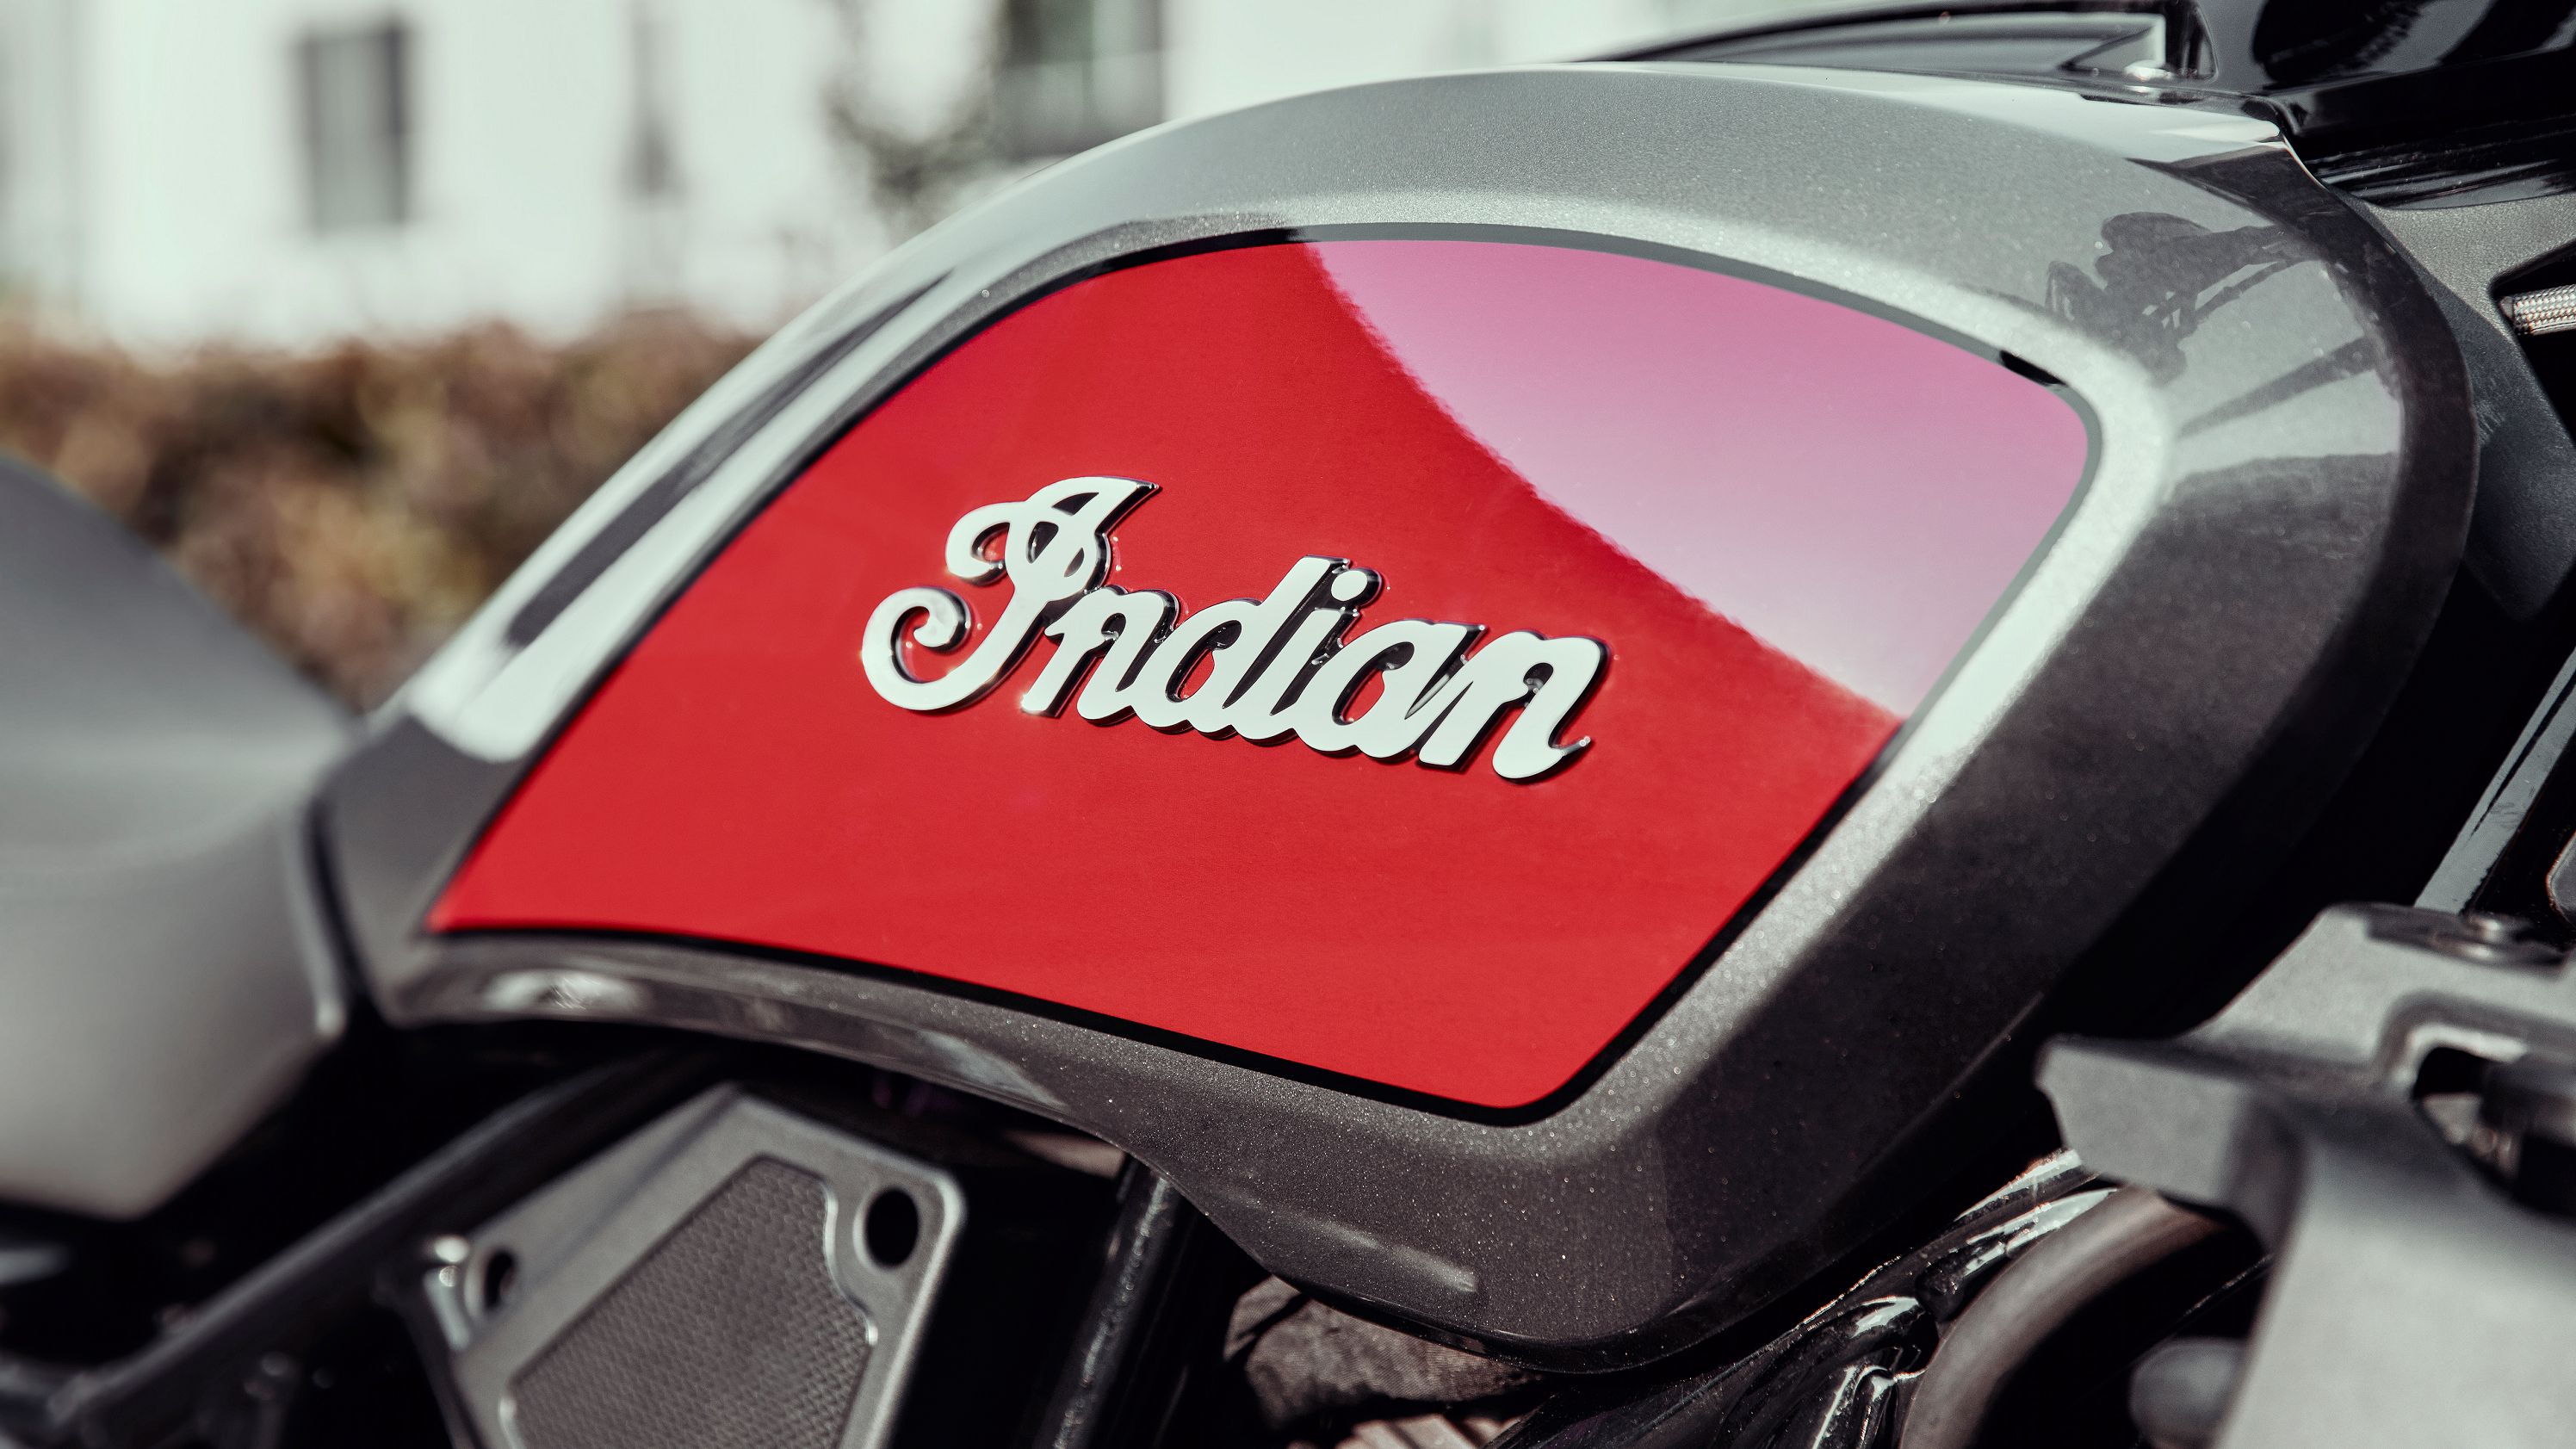 2019 - 2020 Indian Motorcycle FTR 1200 S